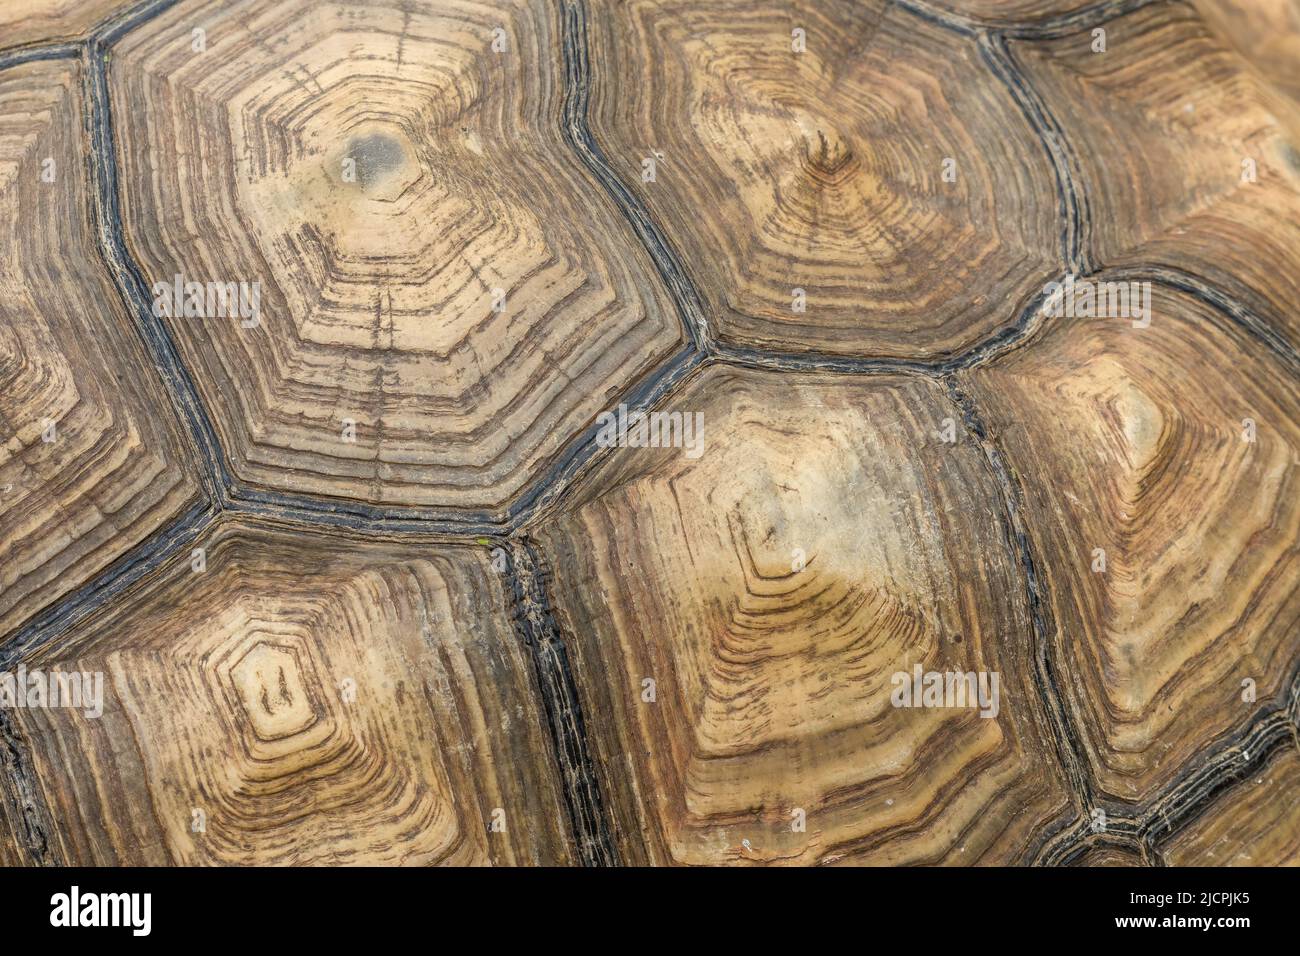 Detail of the carapace of an African Spurred or Sulcata Tortoise. South Padre Island Birding & Nature Center, Texas. Stock Photo